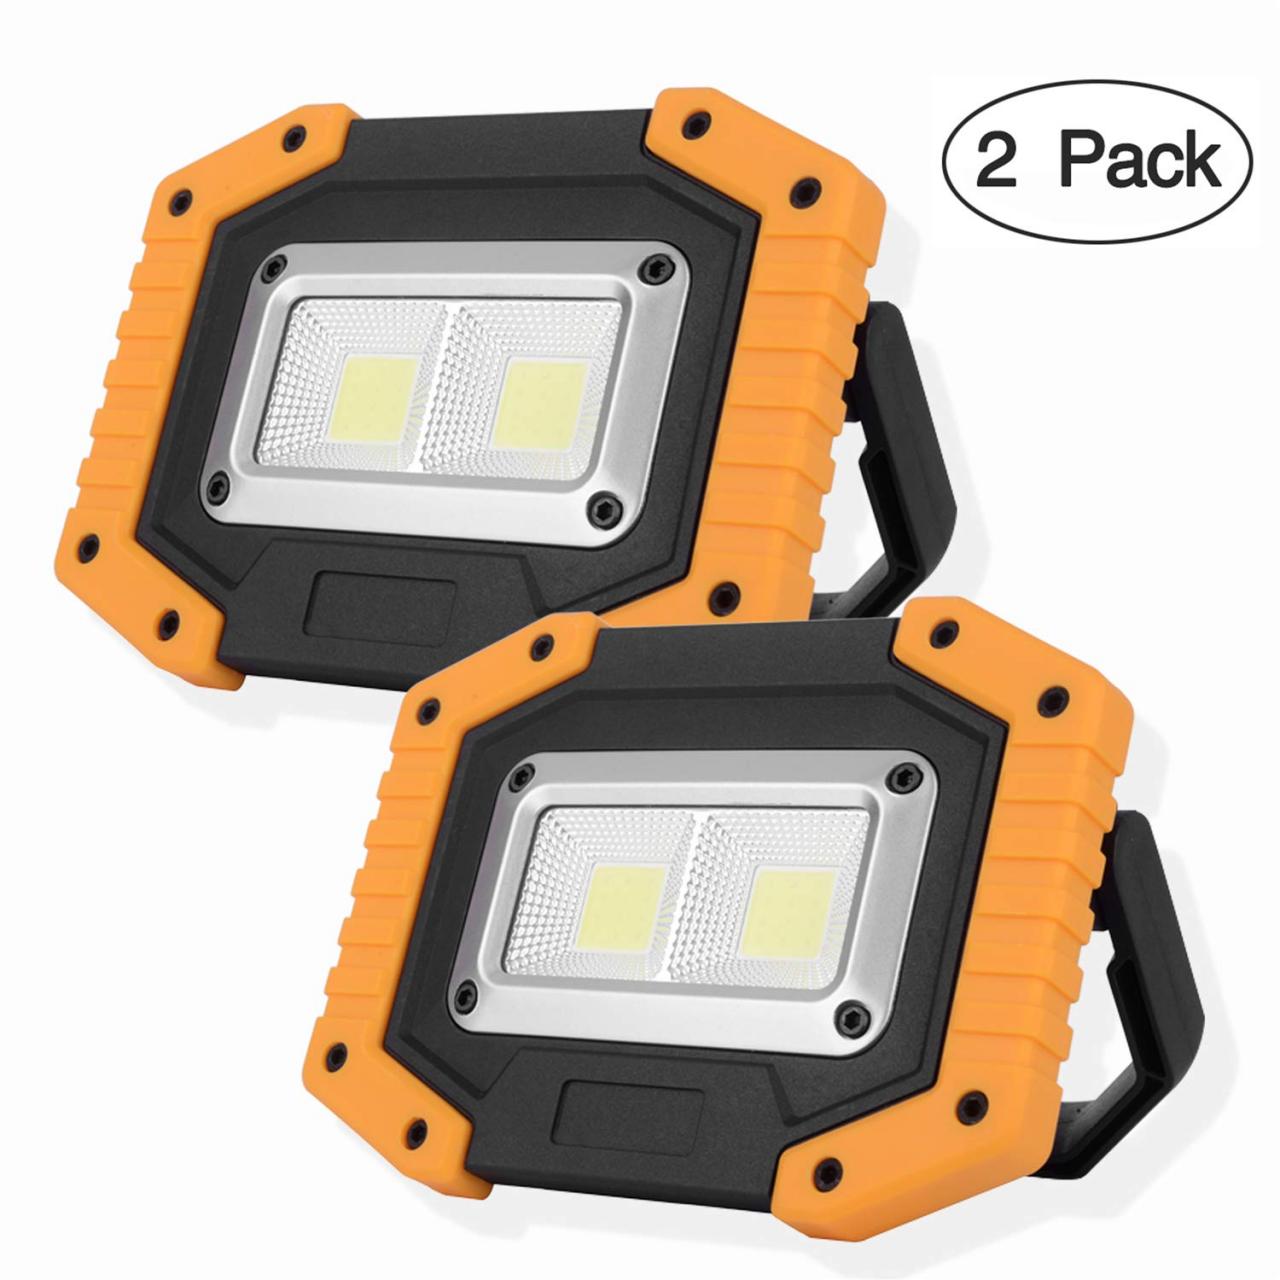 700 Lumen Up To 11.5 Hours Run Time Neiko 40339A Cordless COB LED Work  Light Rechargeable 4,400 mAh Li-ion Battery nayancorporation.com